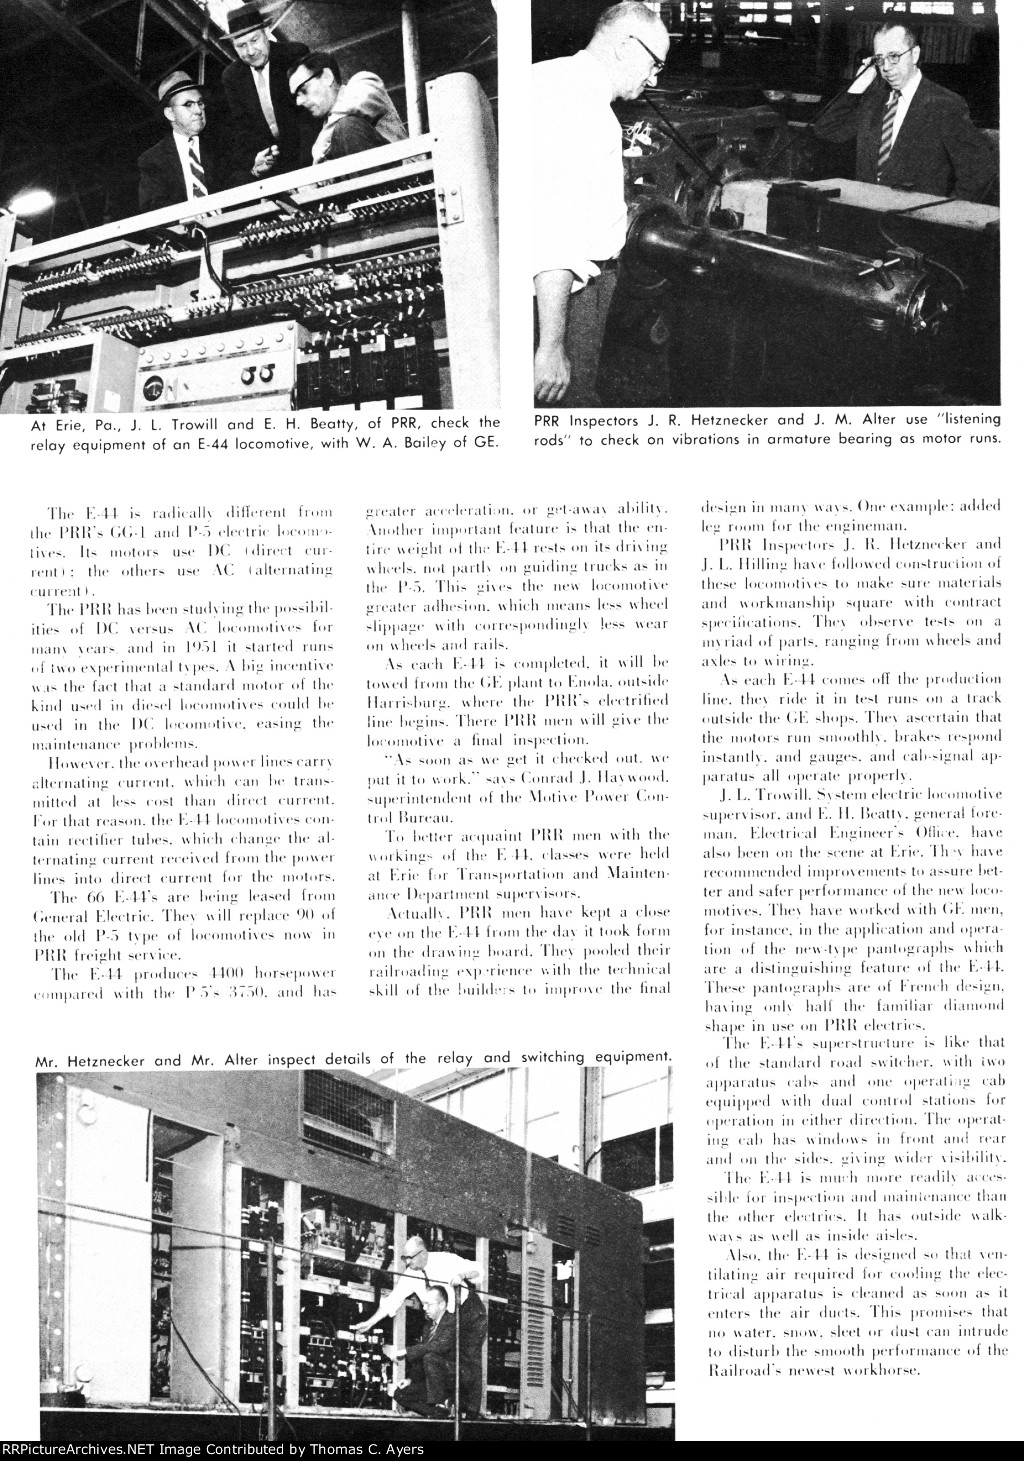 "The New Electrics," Page 2, 1960